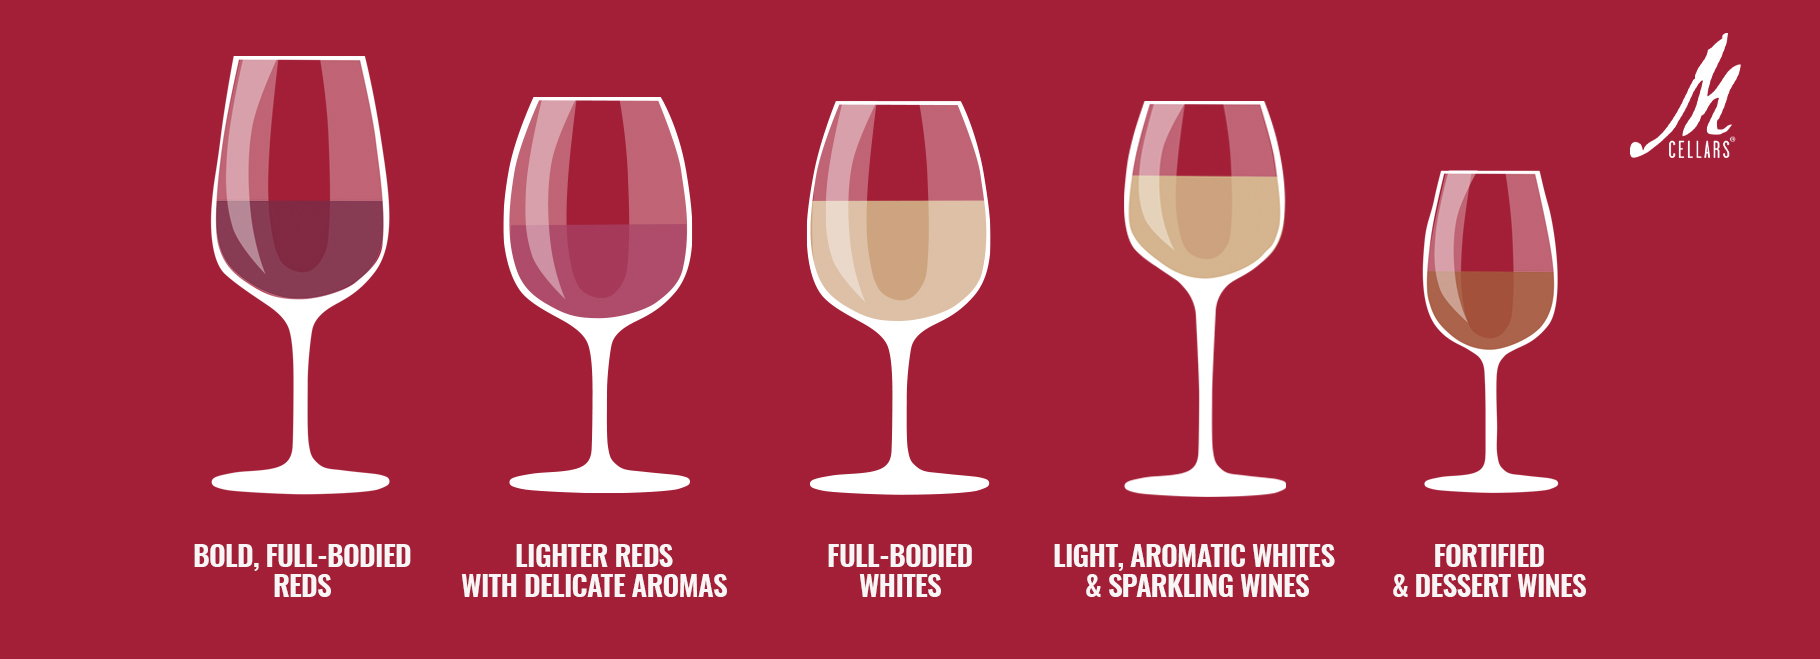 How to choose the right wine glass